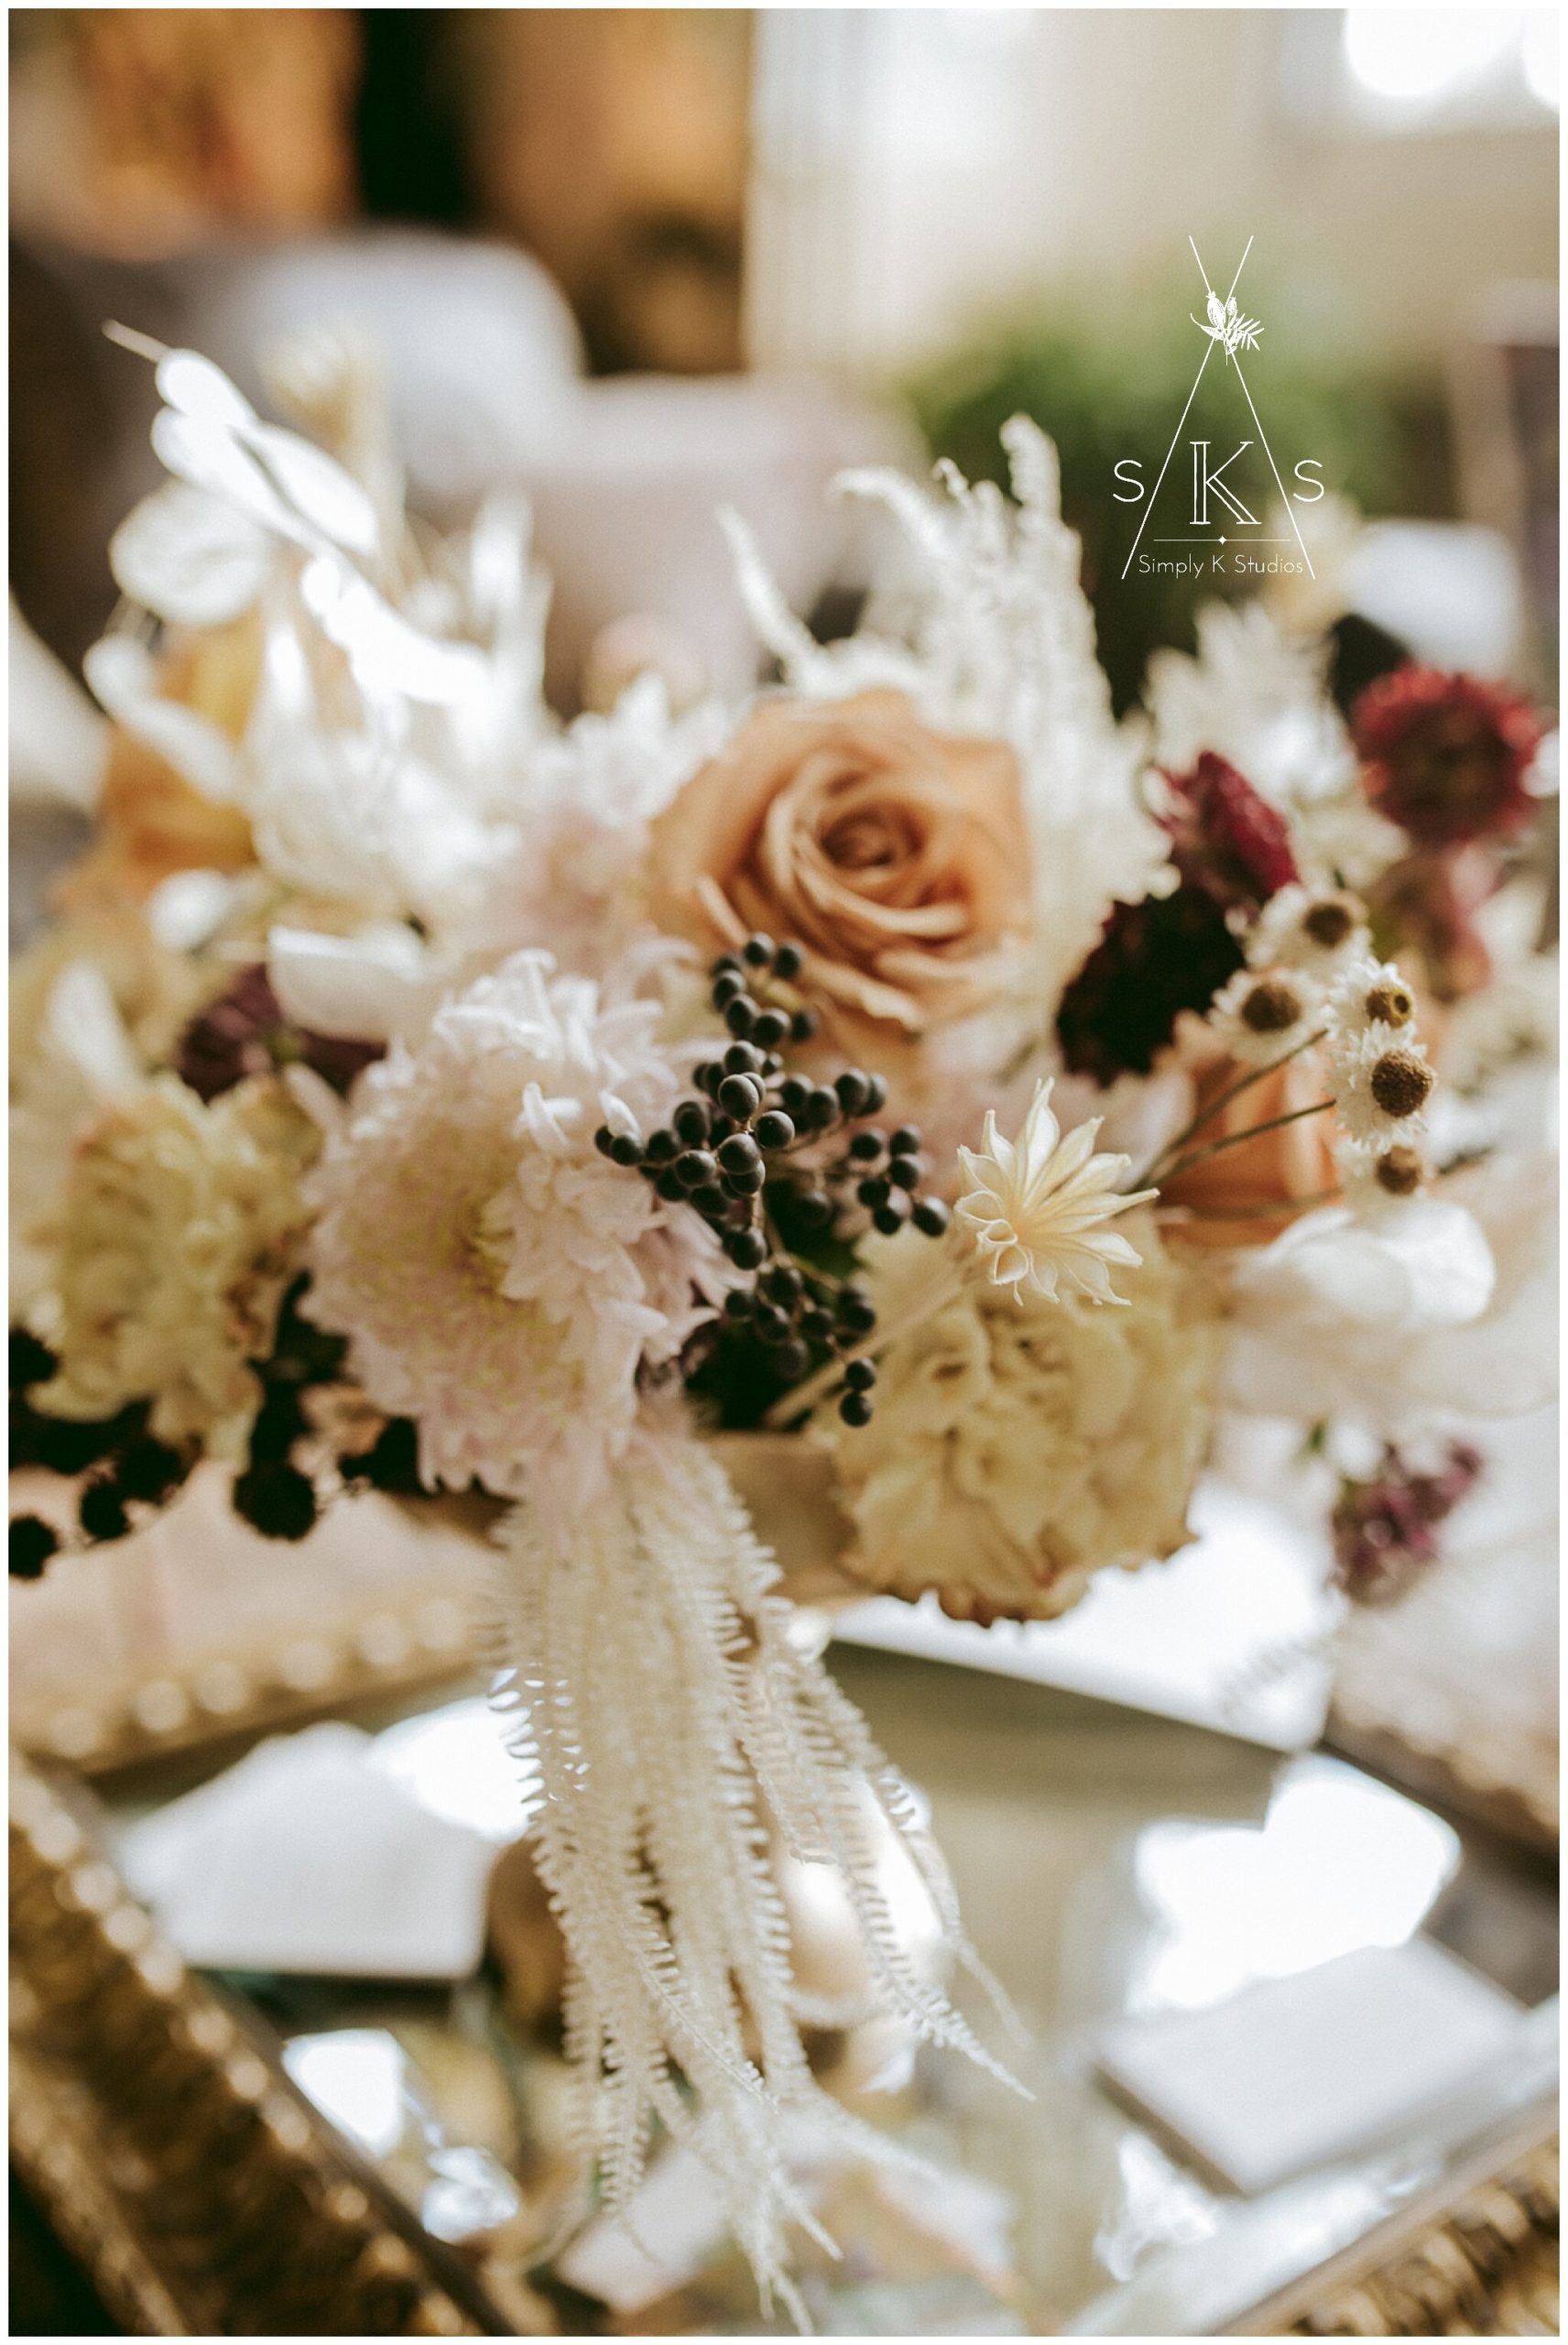  bouquet of dried and fresh flowers on a mirror tray 